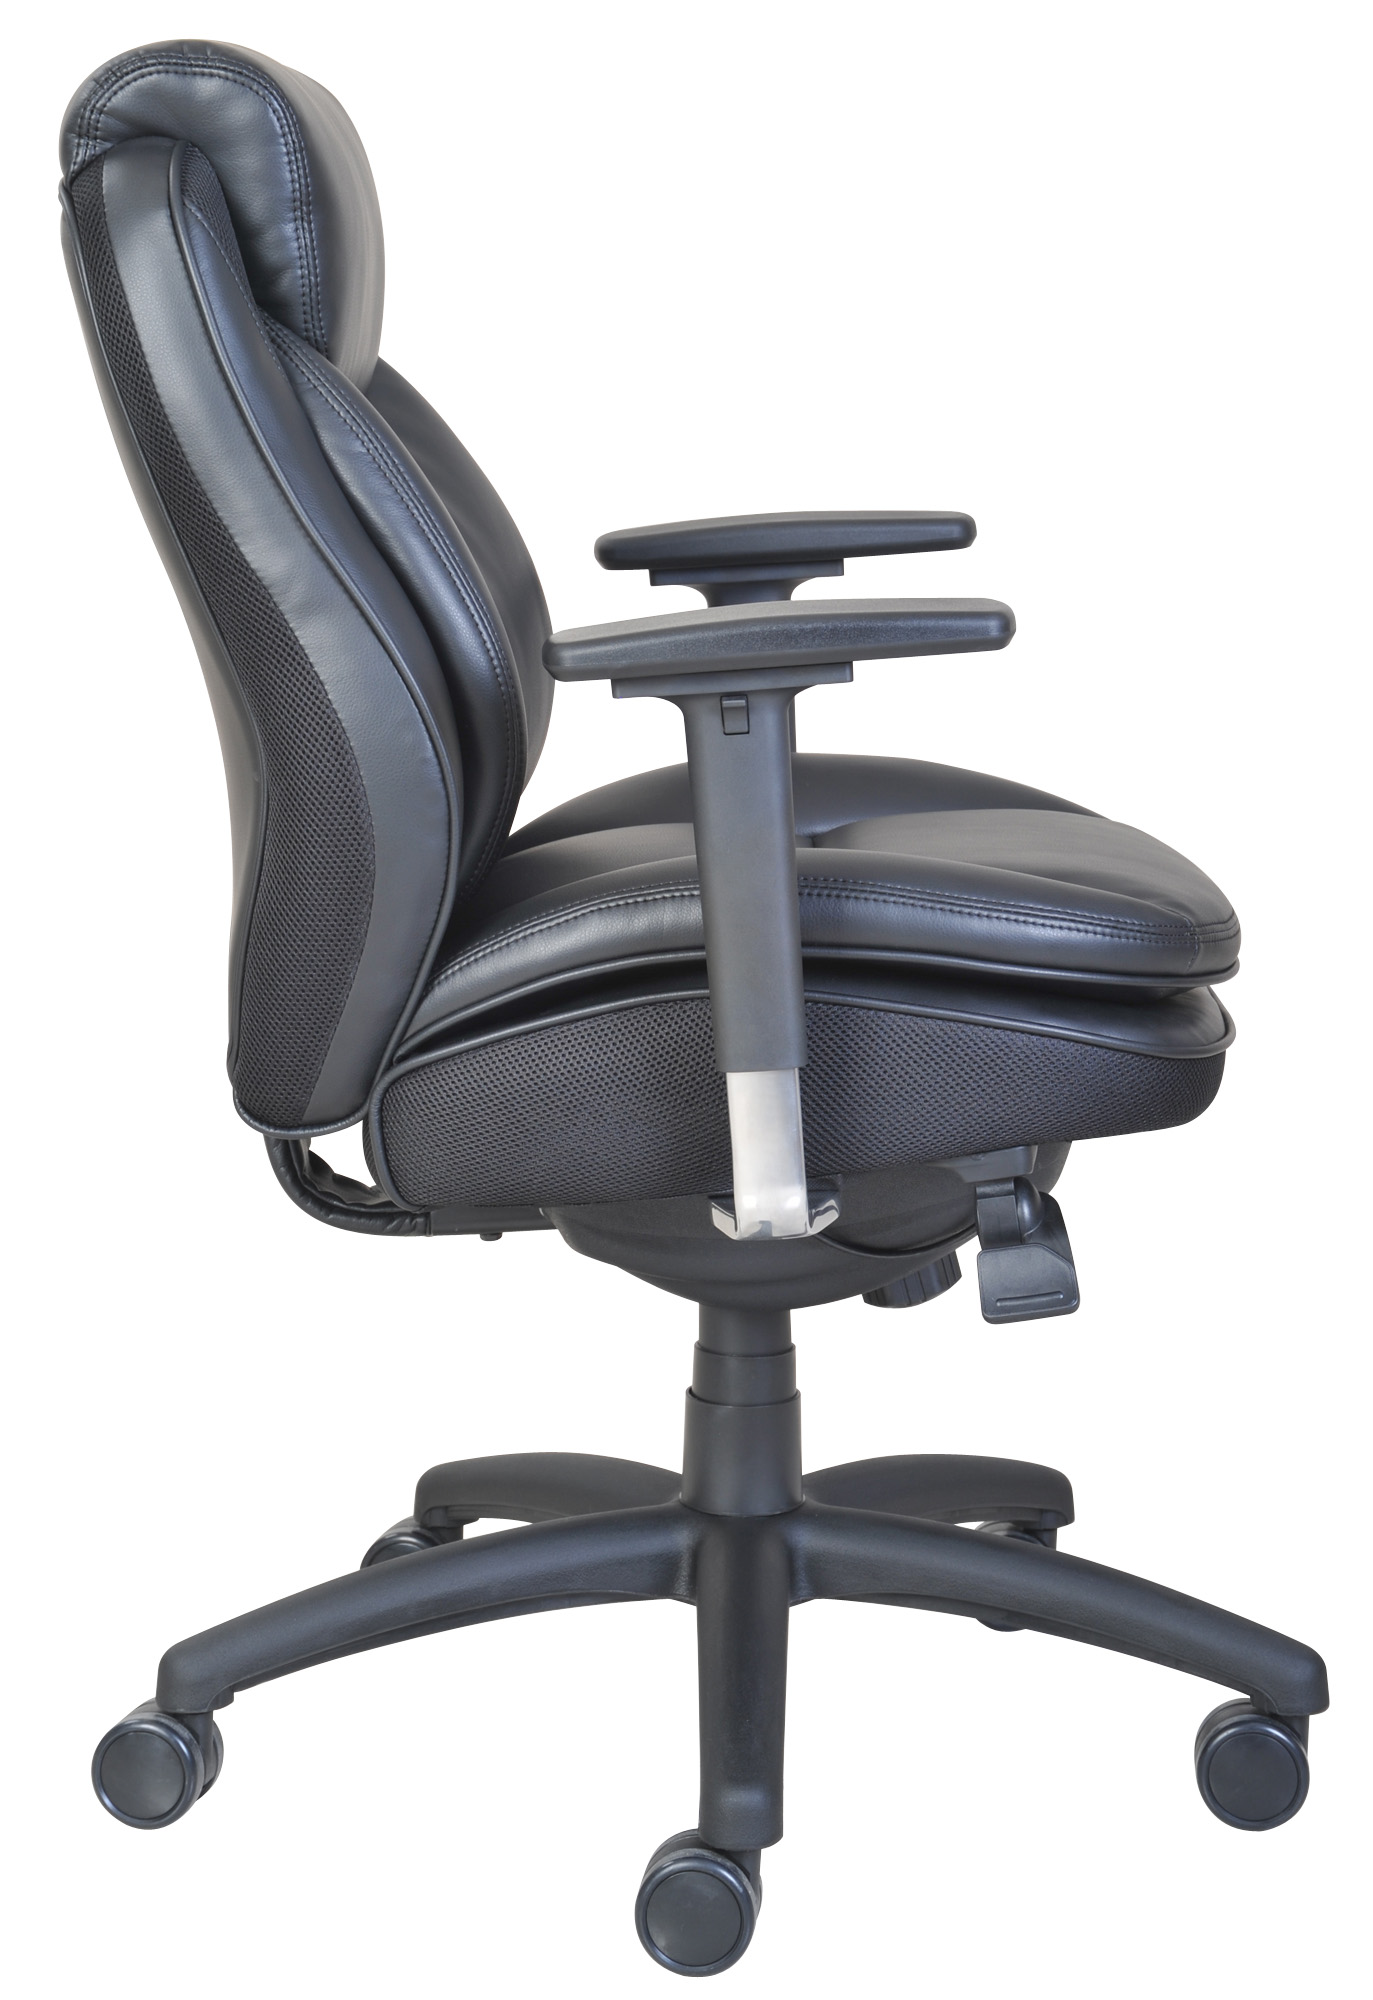 Serta at Home Smart Layers Commercial Series 400 Task Chair Black